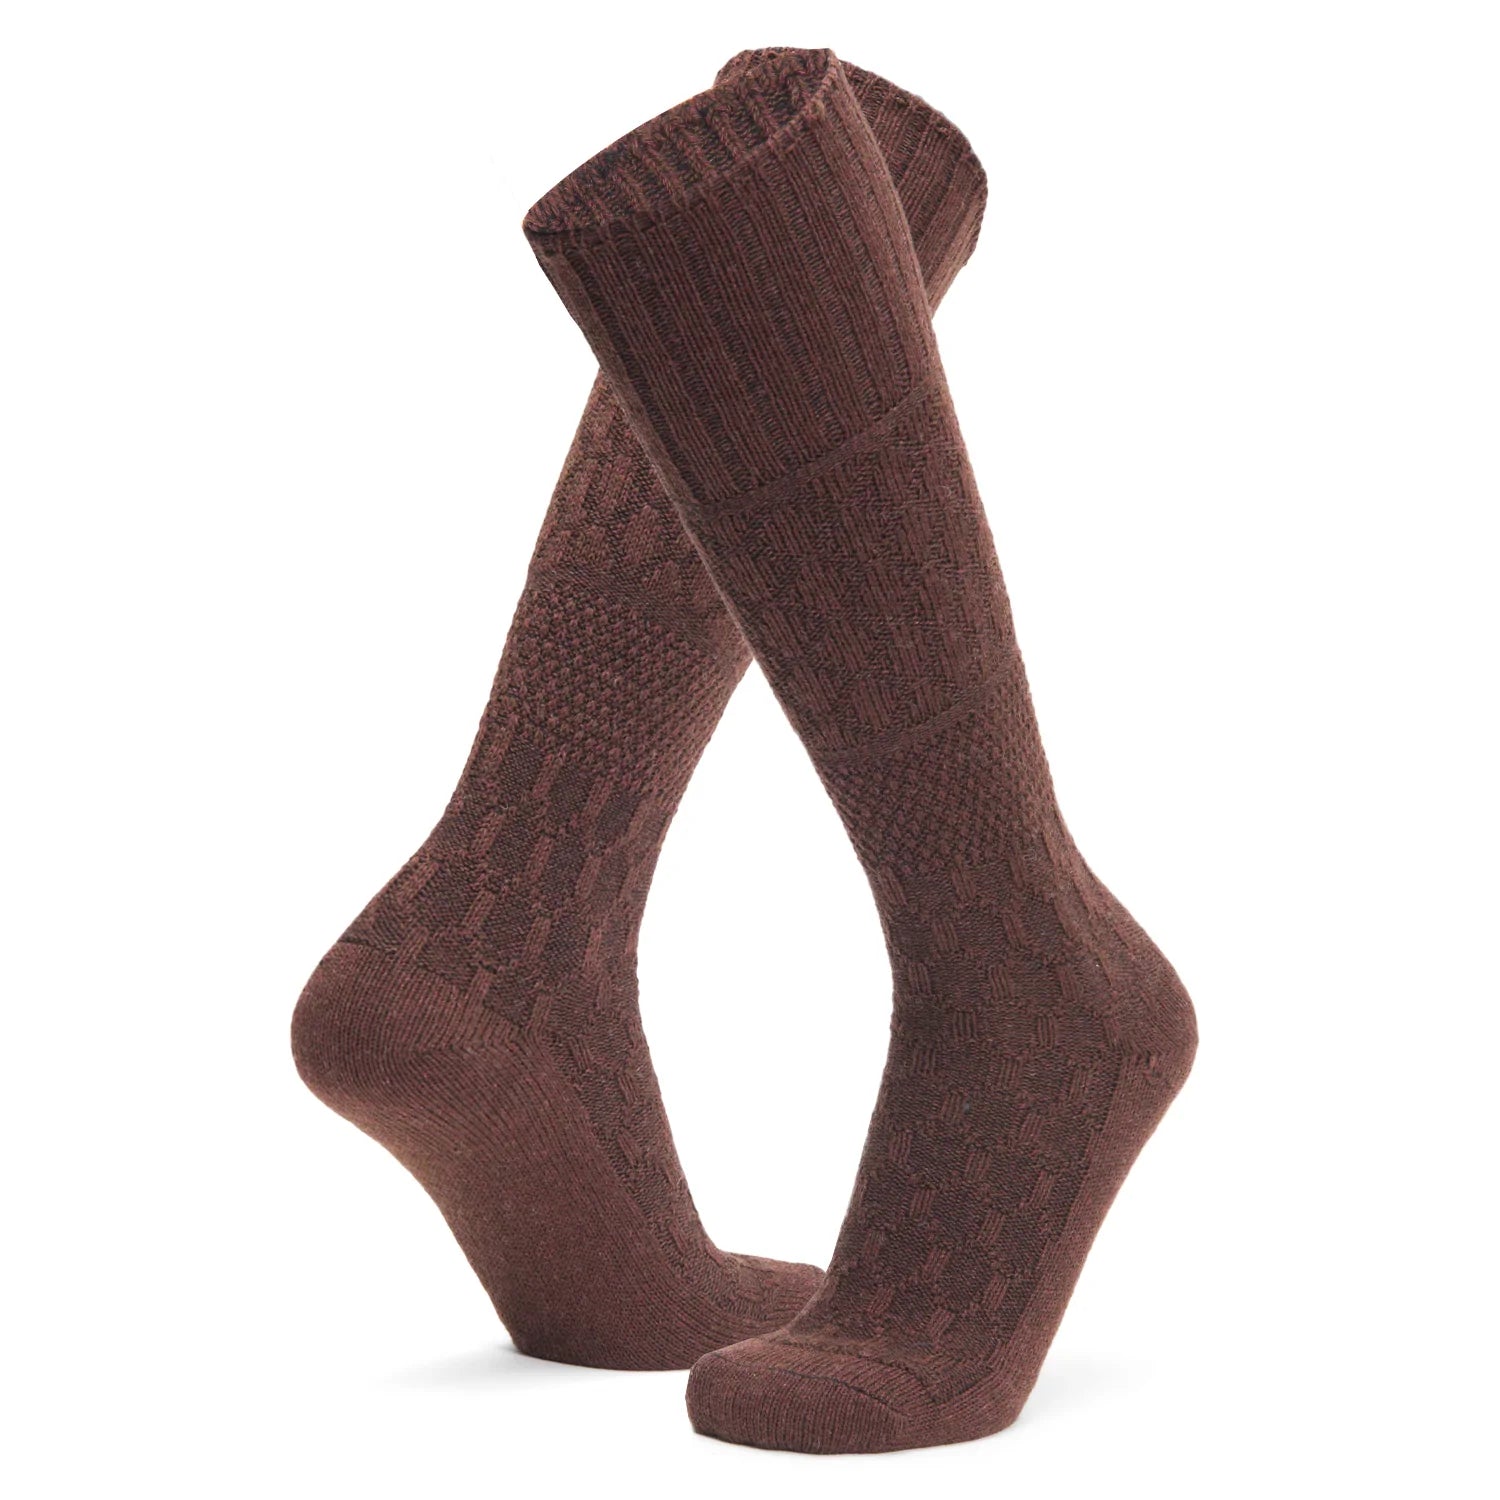 Diamond Knee High Lightweight Sock With Recycled Wool - Brown full product perspective - made in The USA Wigwam Socks